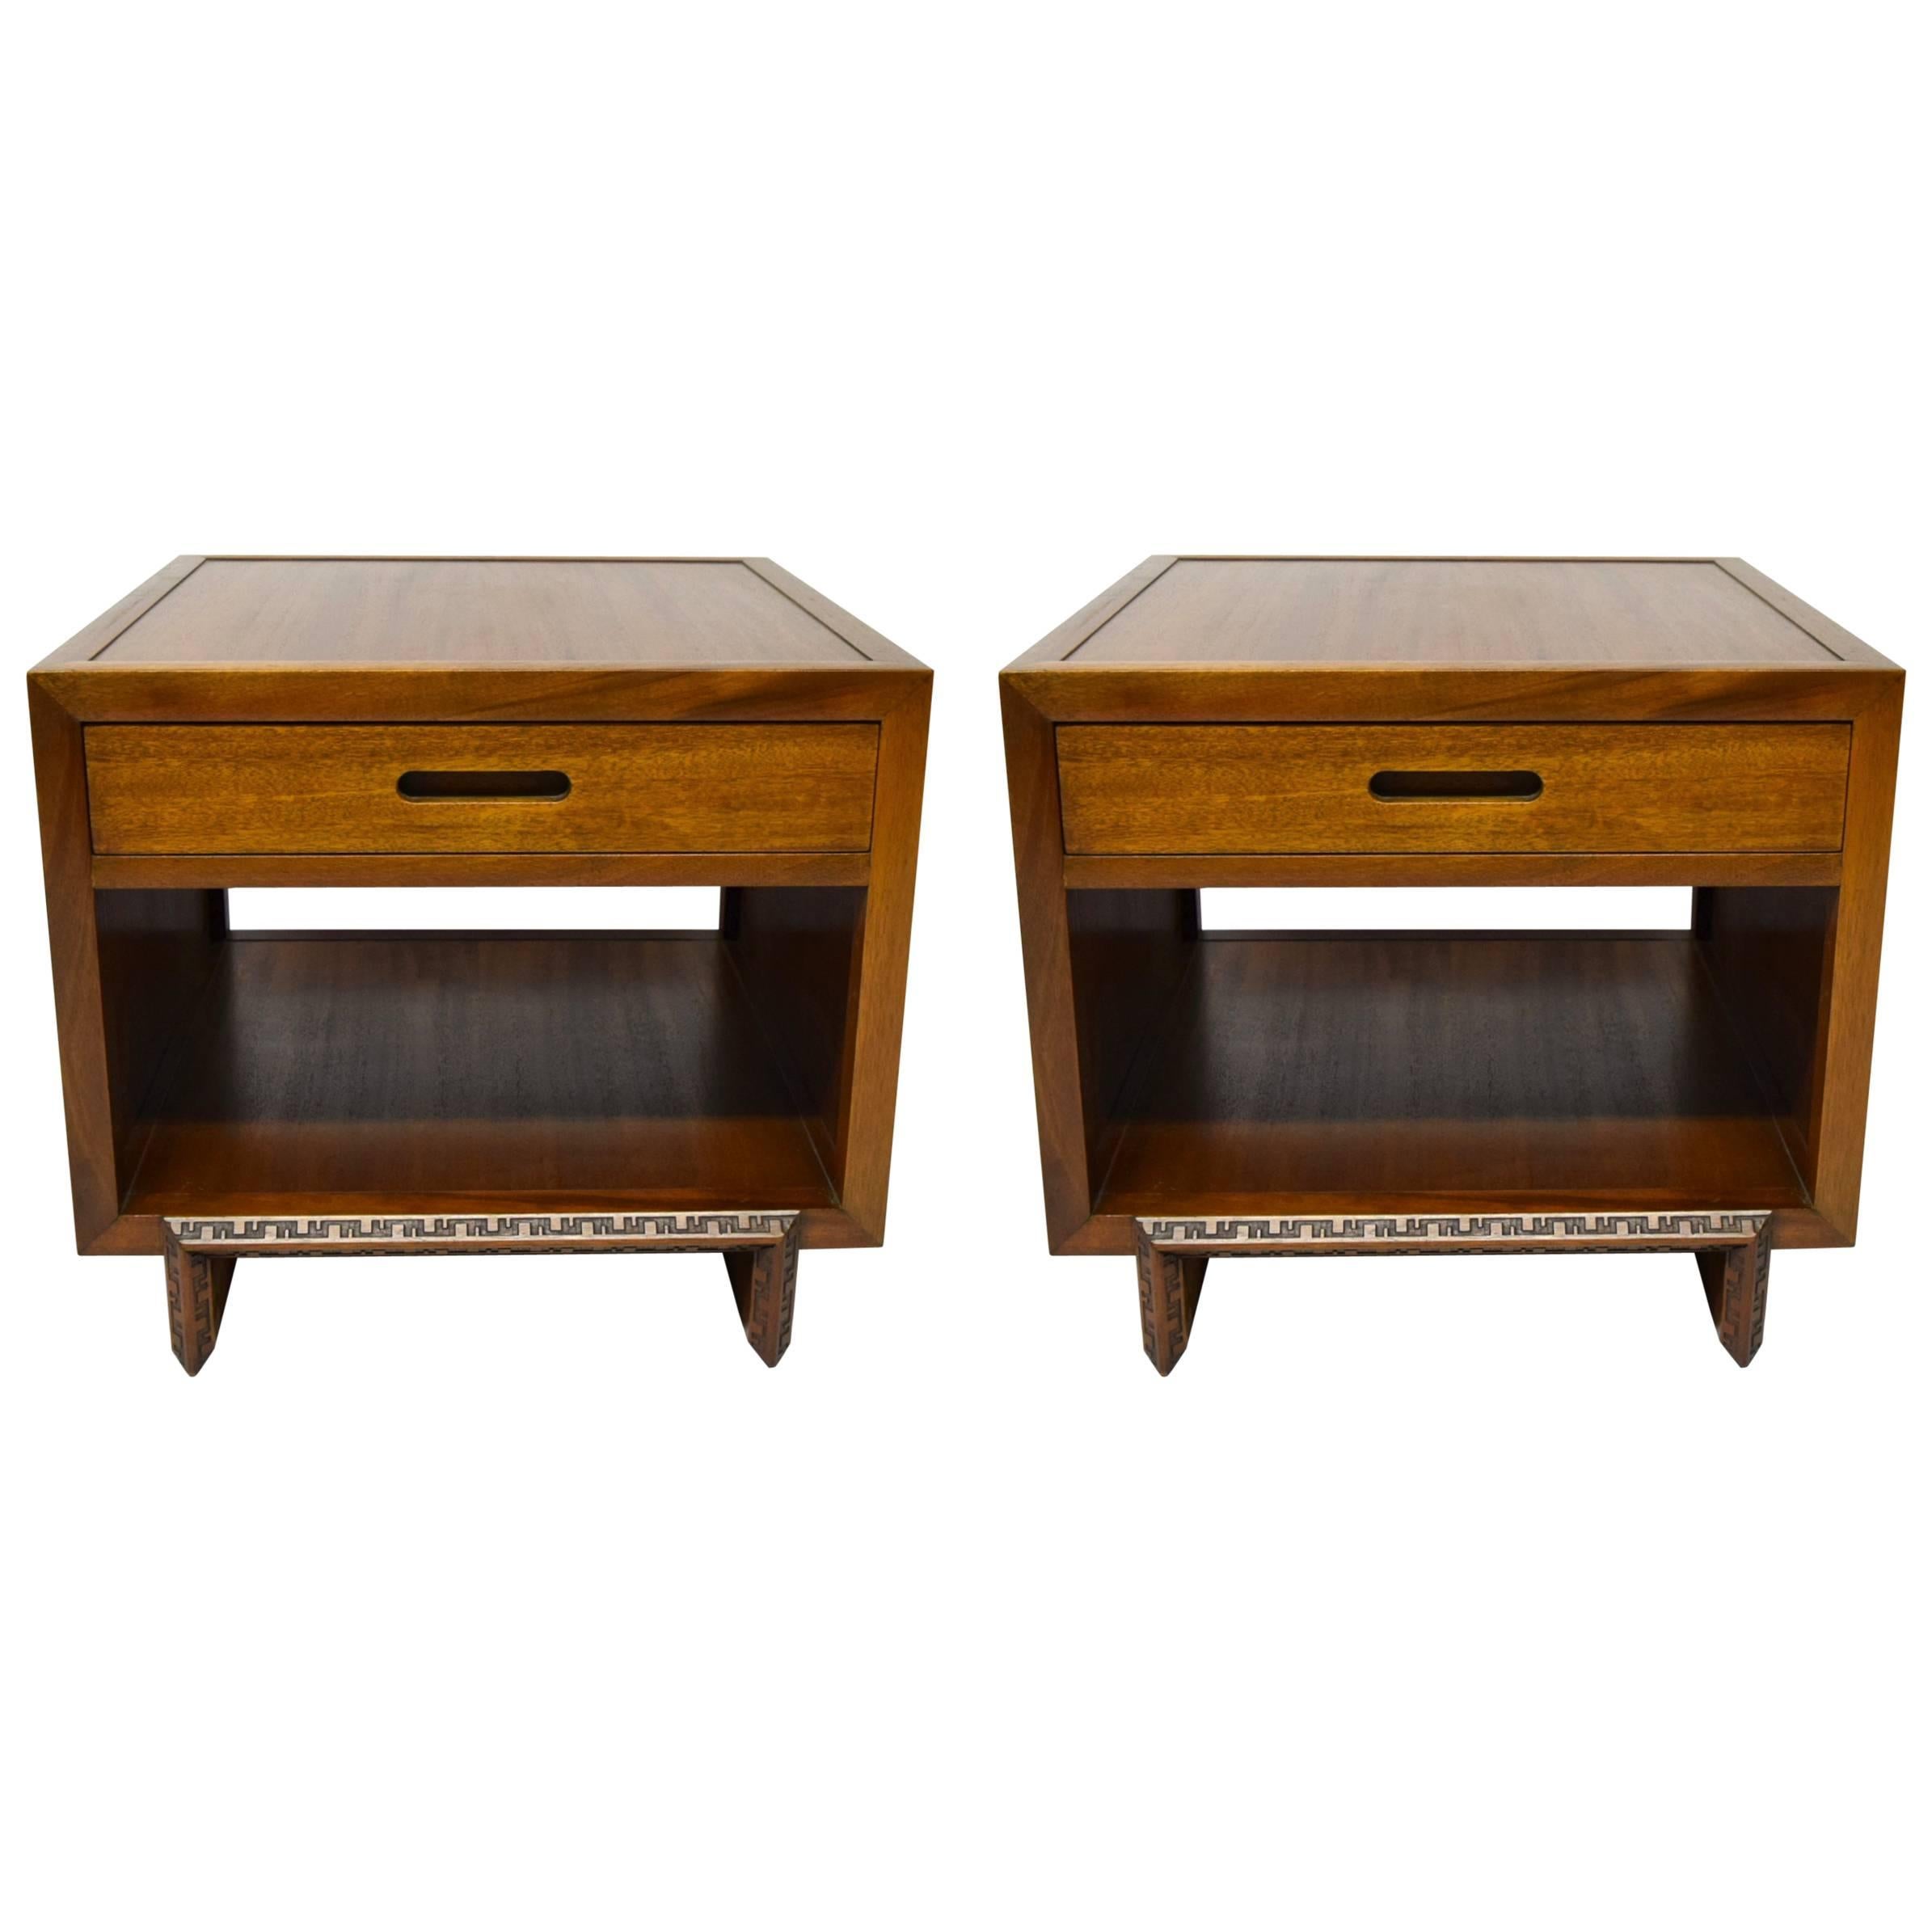 Pair of Side Tables by Frank Lloyd Wright for Heritage-Henredon, 1955-1956, USA